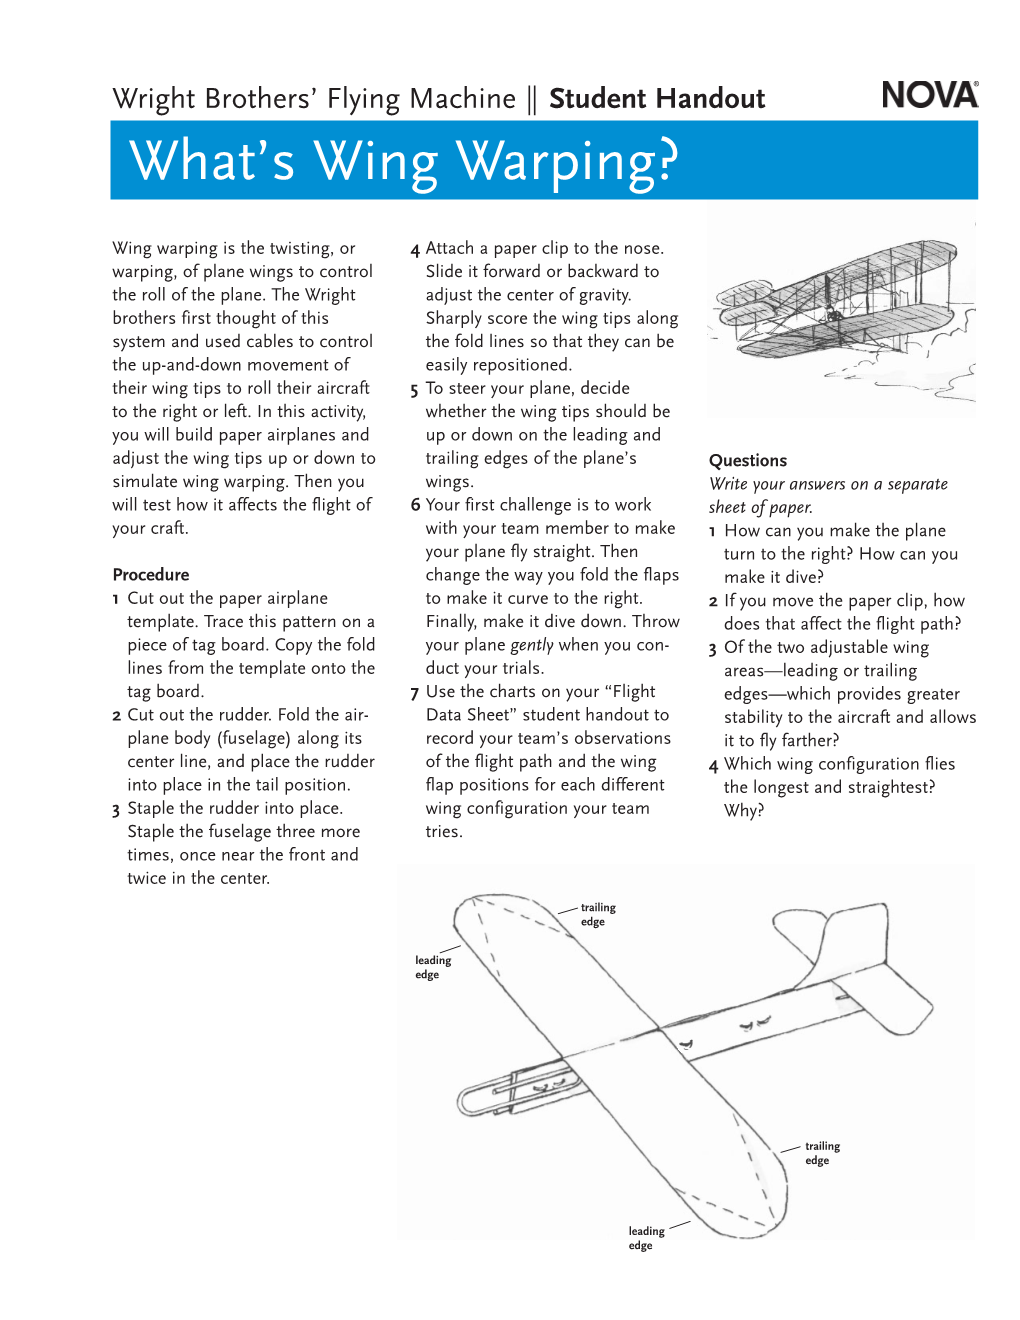 What's Wing Warping?